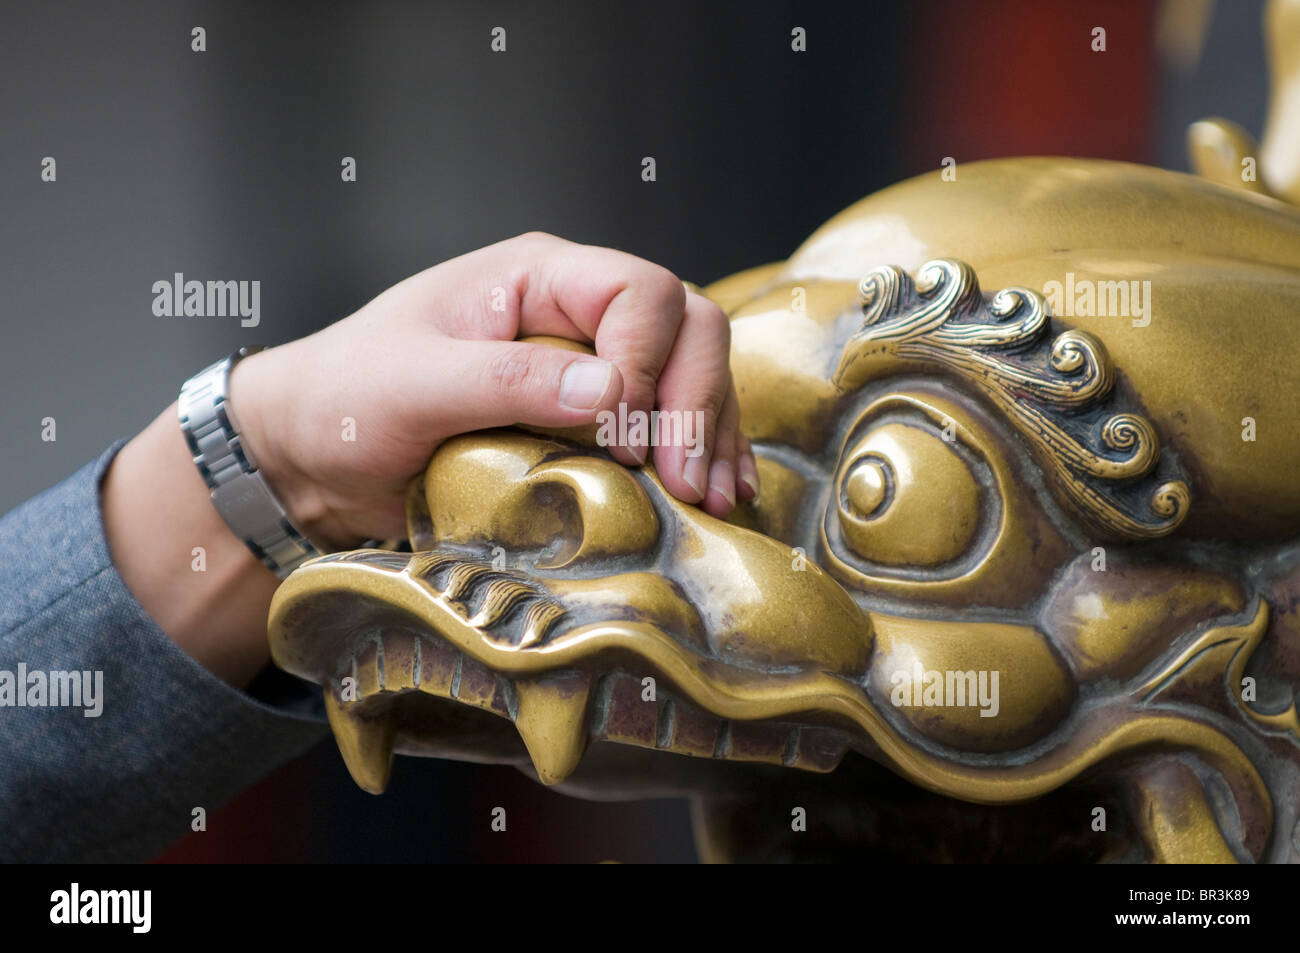 Worshiper caresses brass lion hoping to improve health, Wenshu Temple, Chengdu, Sichuan Province, China Stock Photo